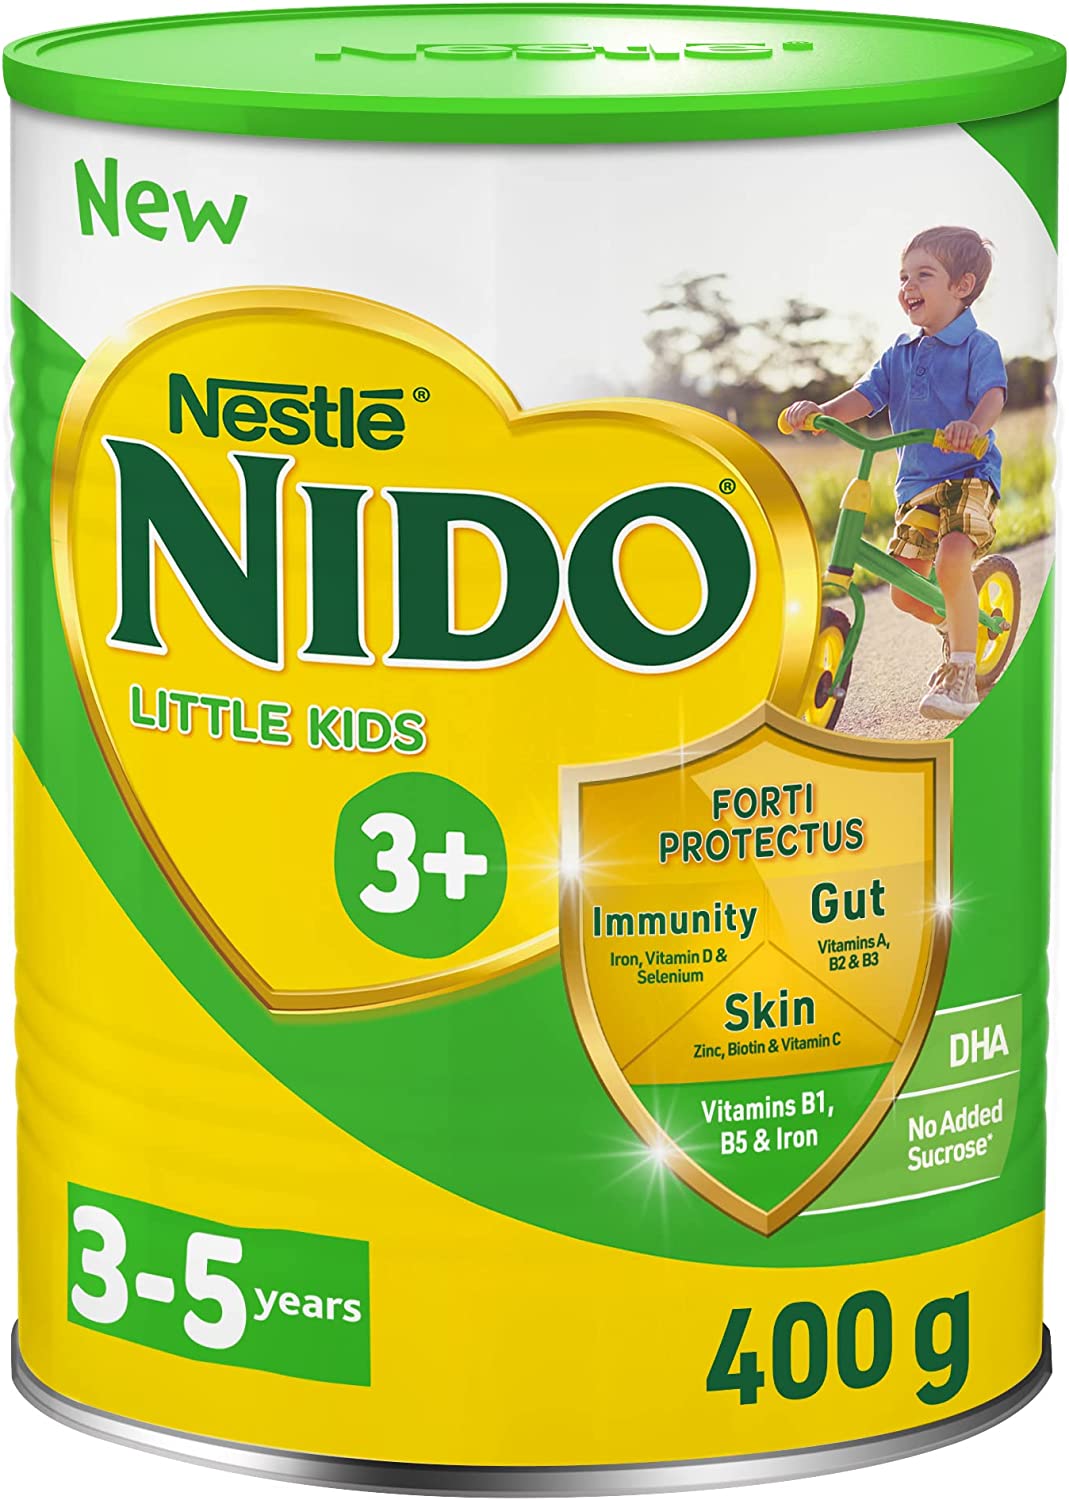 Nido Nestle Little Kids 3+ Growing Up Milk Powder Tin For Toddlers 3-5 years, 400, Pack Of 1